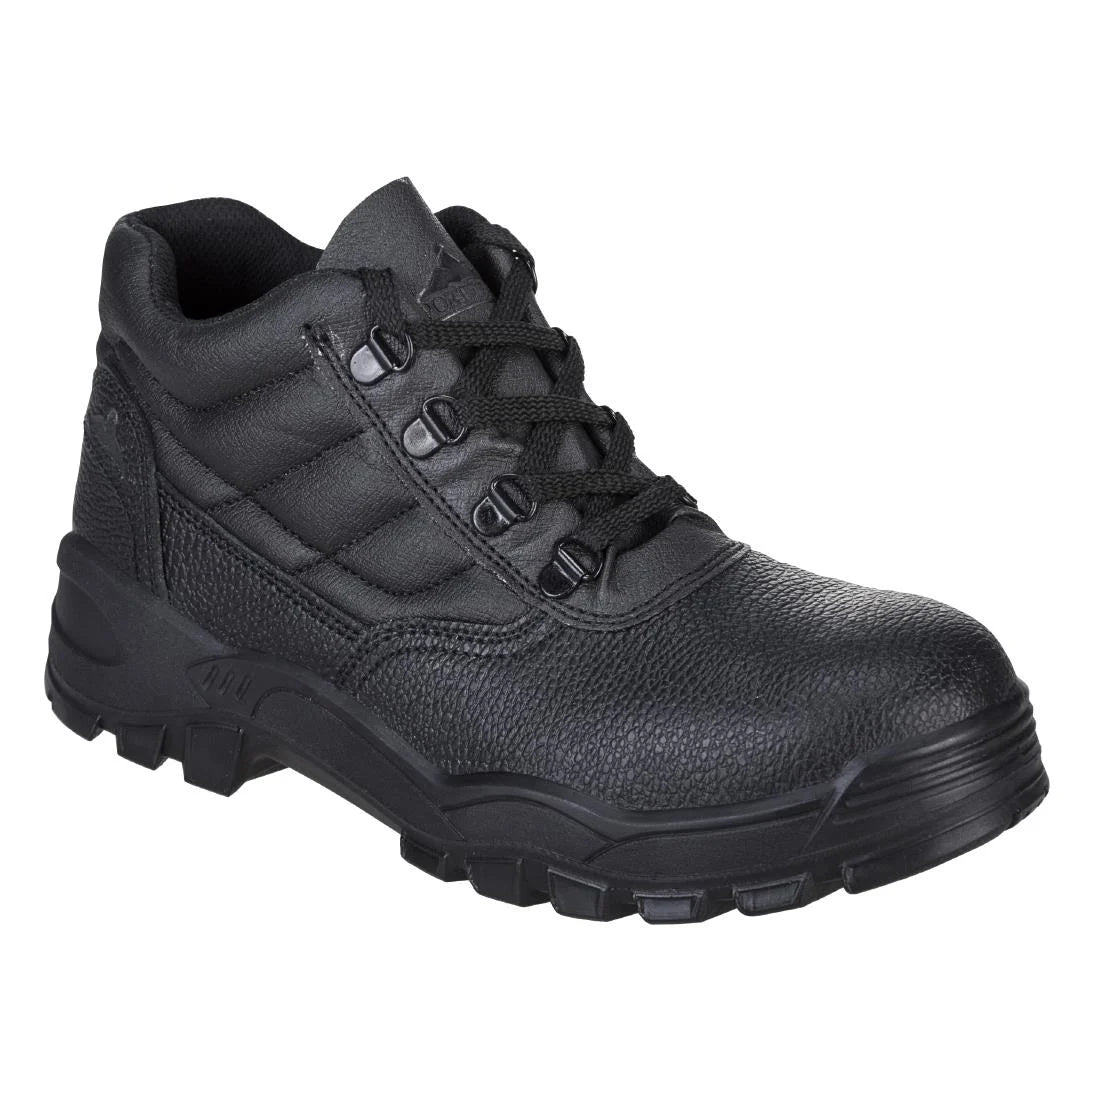 BA059-46 Portwest Protector Boot S1P Black Size 46 JD Catering Equipment Solutions Ltd